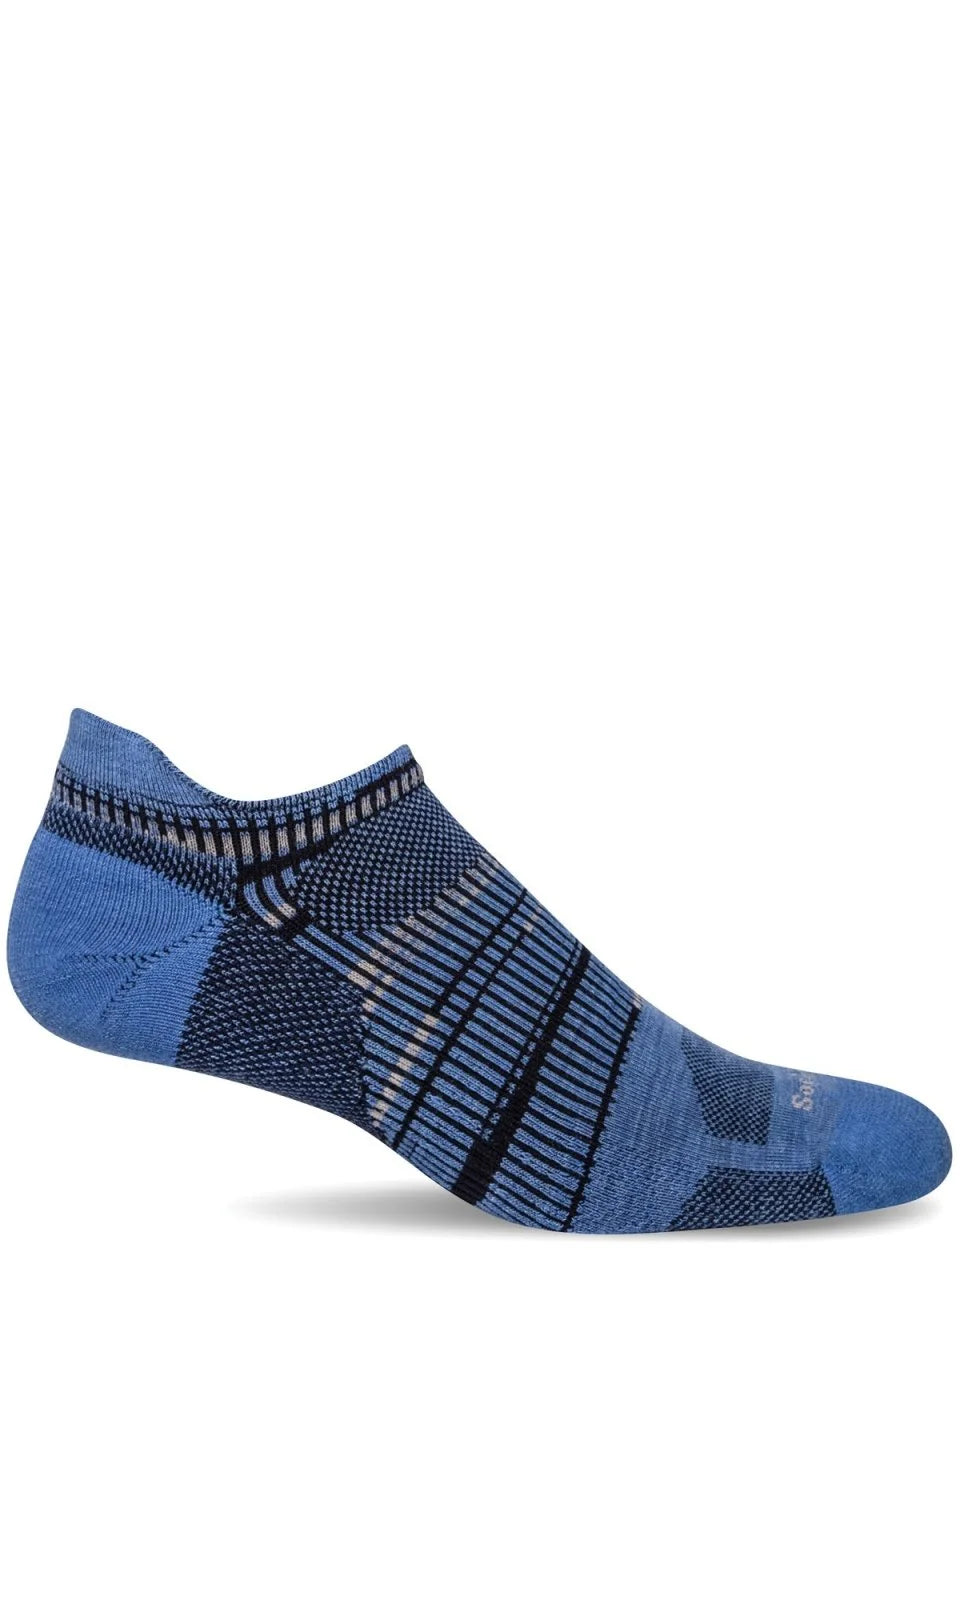 Sprint Micro Men's Bamboo/Merino Moderate Compression Ankle Socks in Ocean - The Sockery